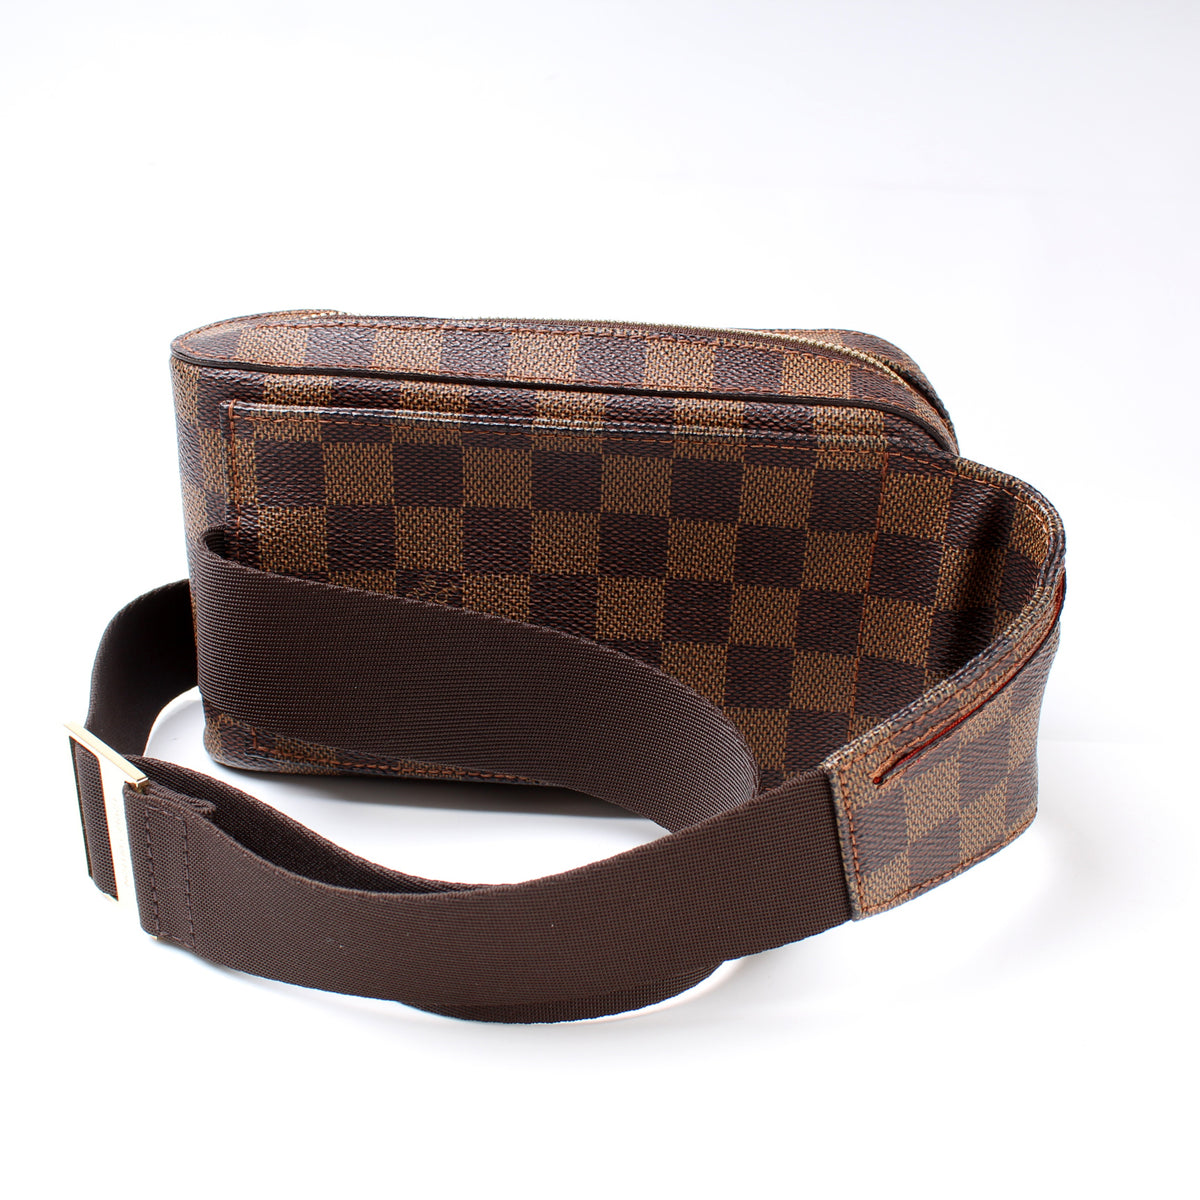 Louis Vuitton Geronimo Brown Canvas Clutch Bag (Pre-Owned)